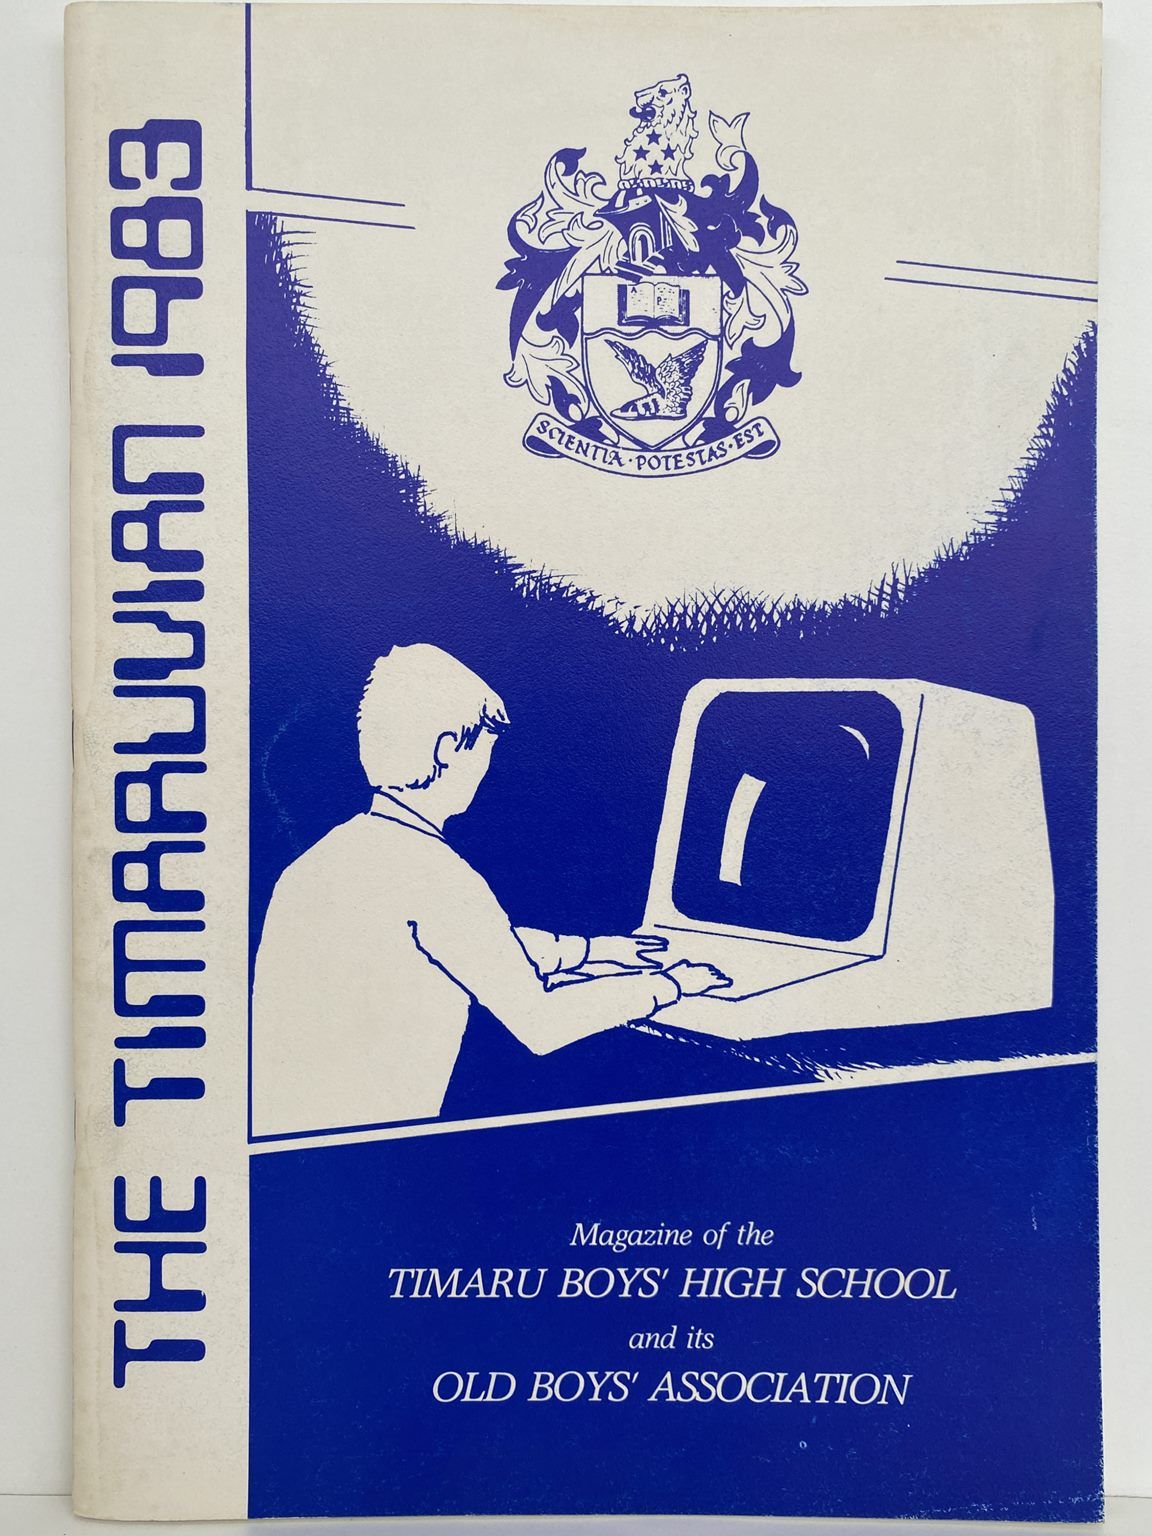 THE TIMARUVIAN: Magazine of the Timaru Boys High School and its Old Boys' 1983